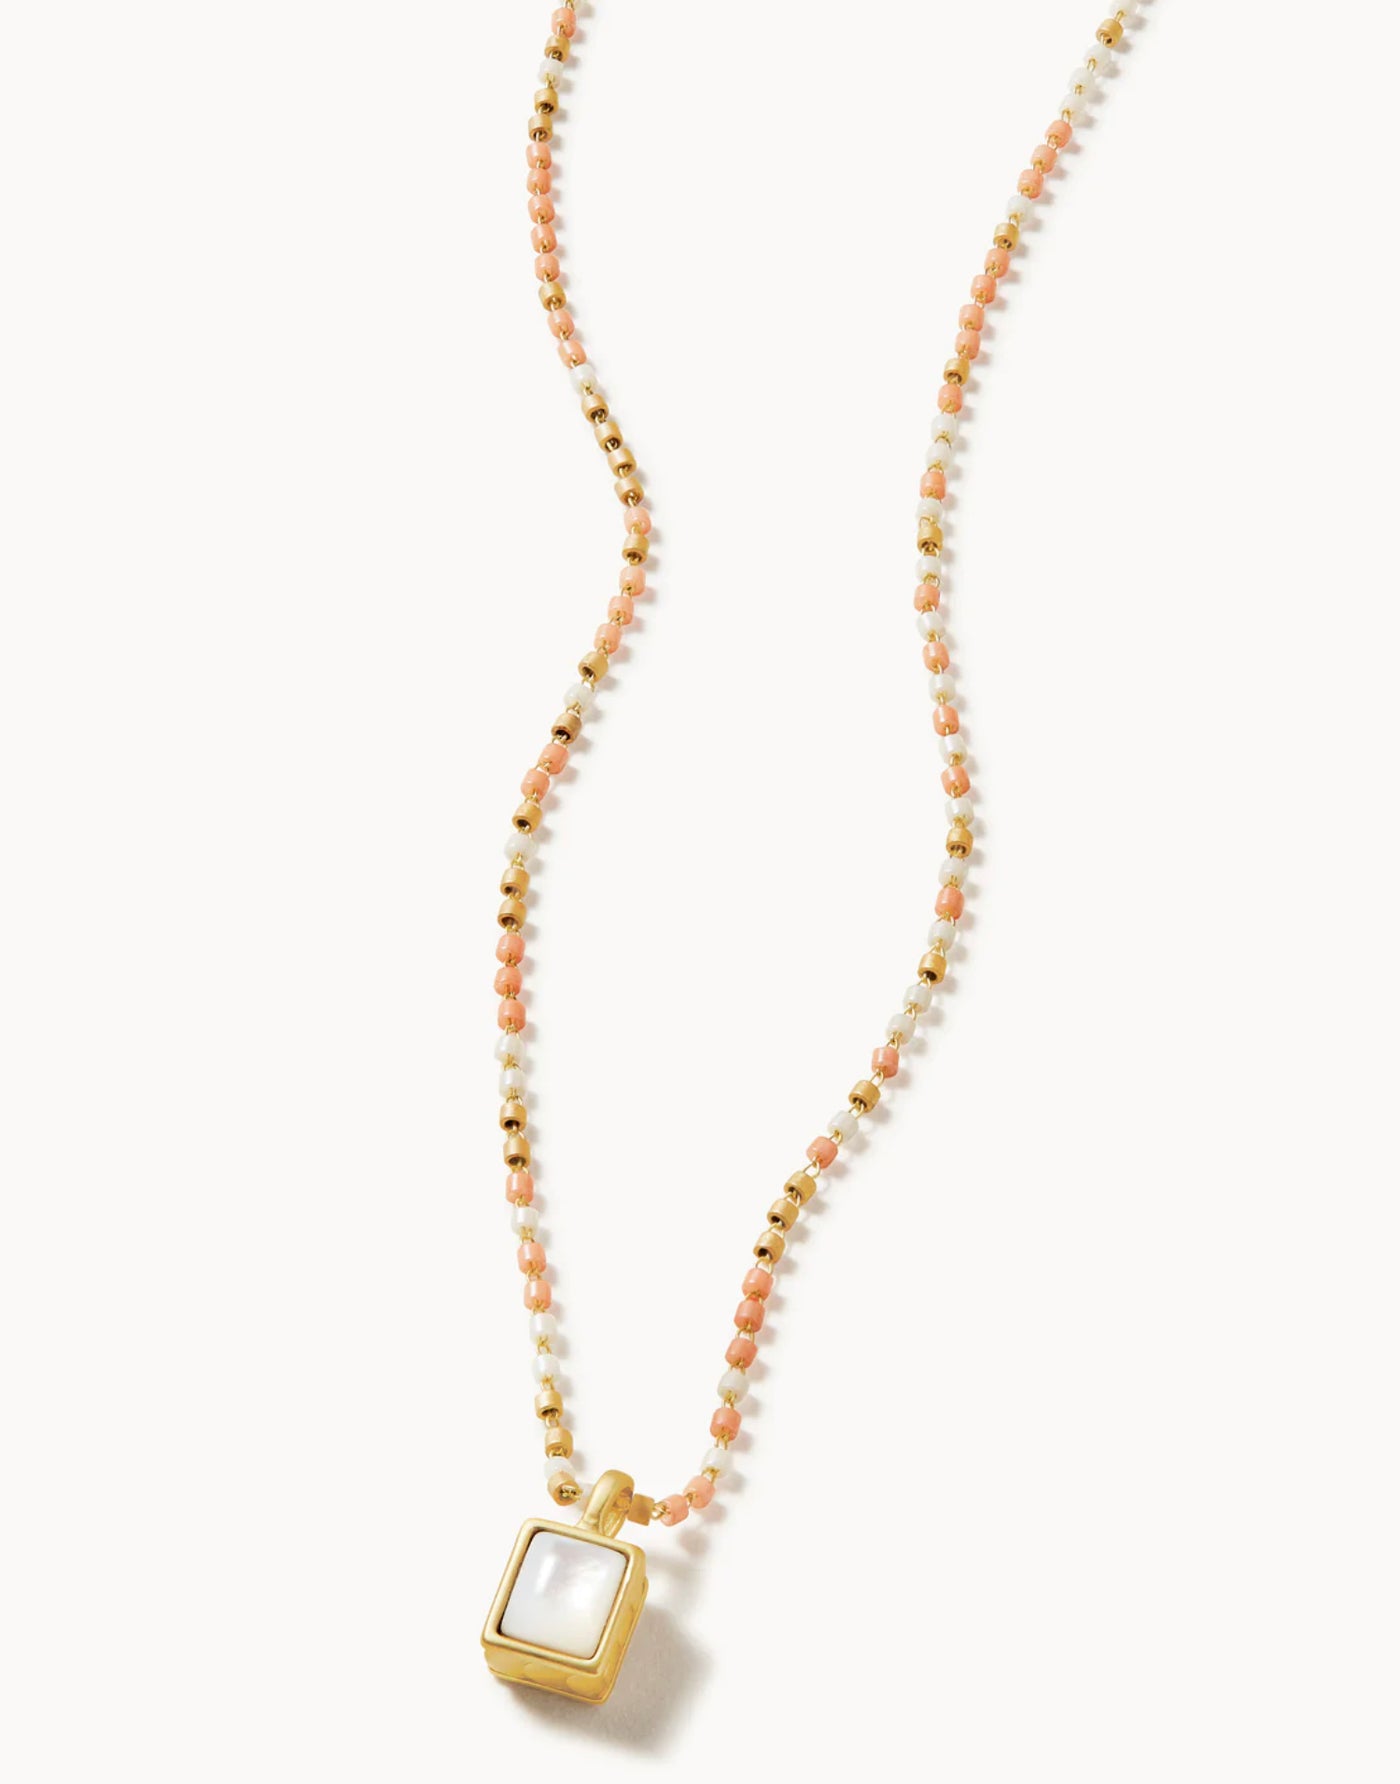 Naia Petite Mother of Pearl Beaded Necklace